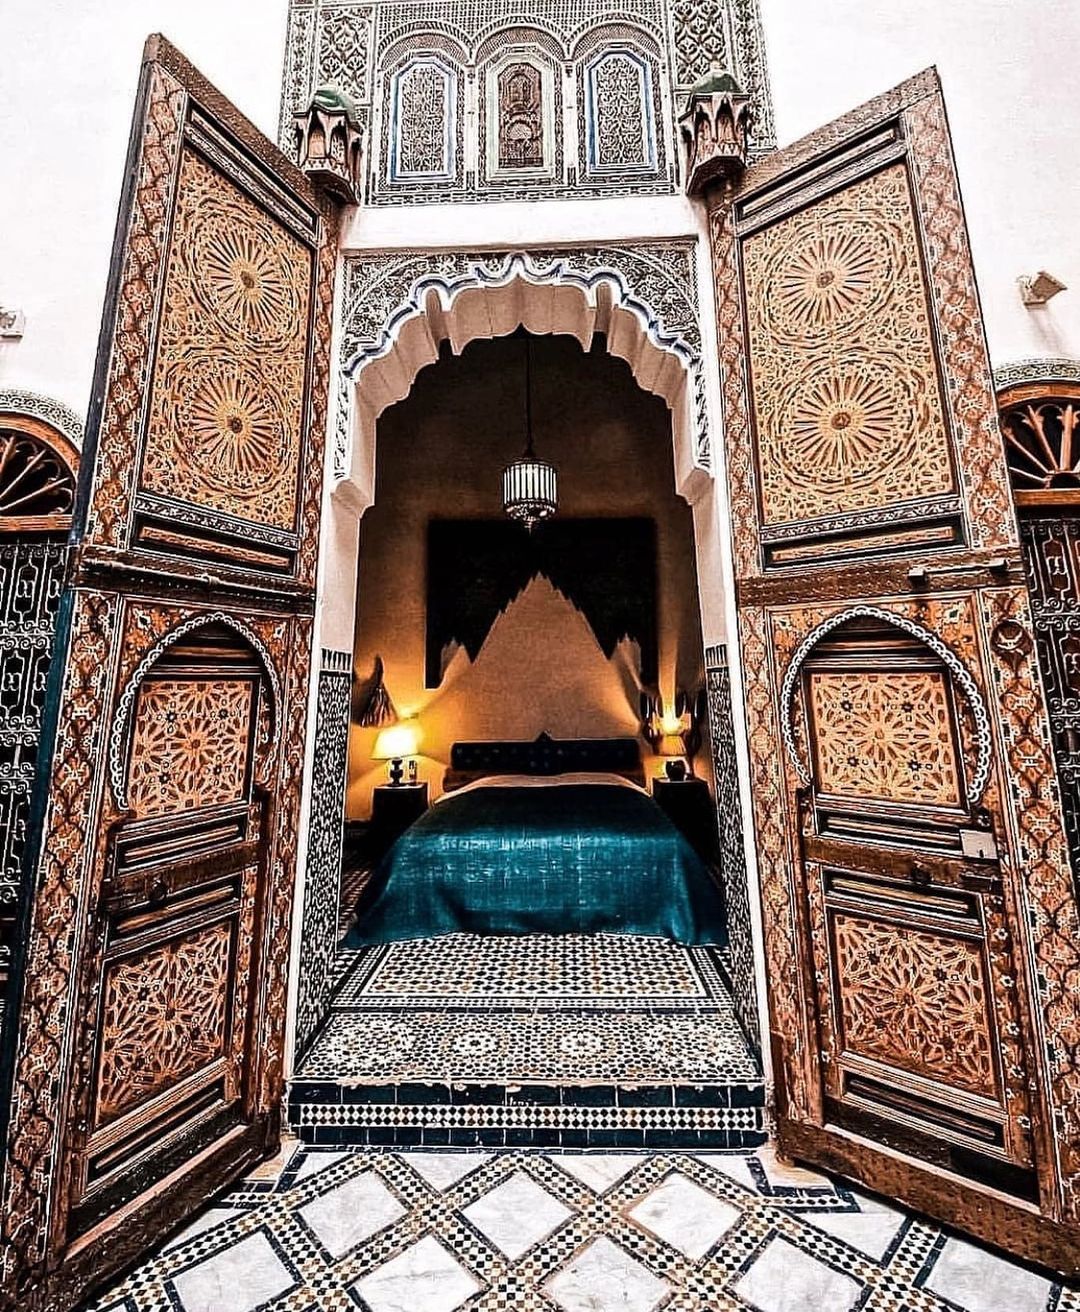 Day 6: Fes–Chefchaouen